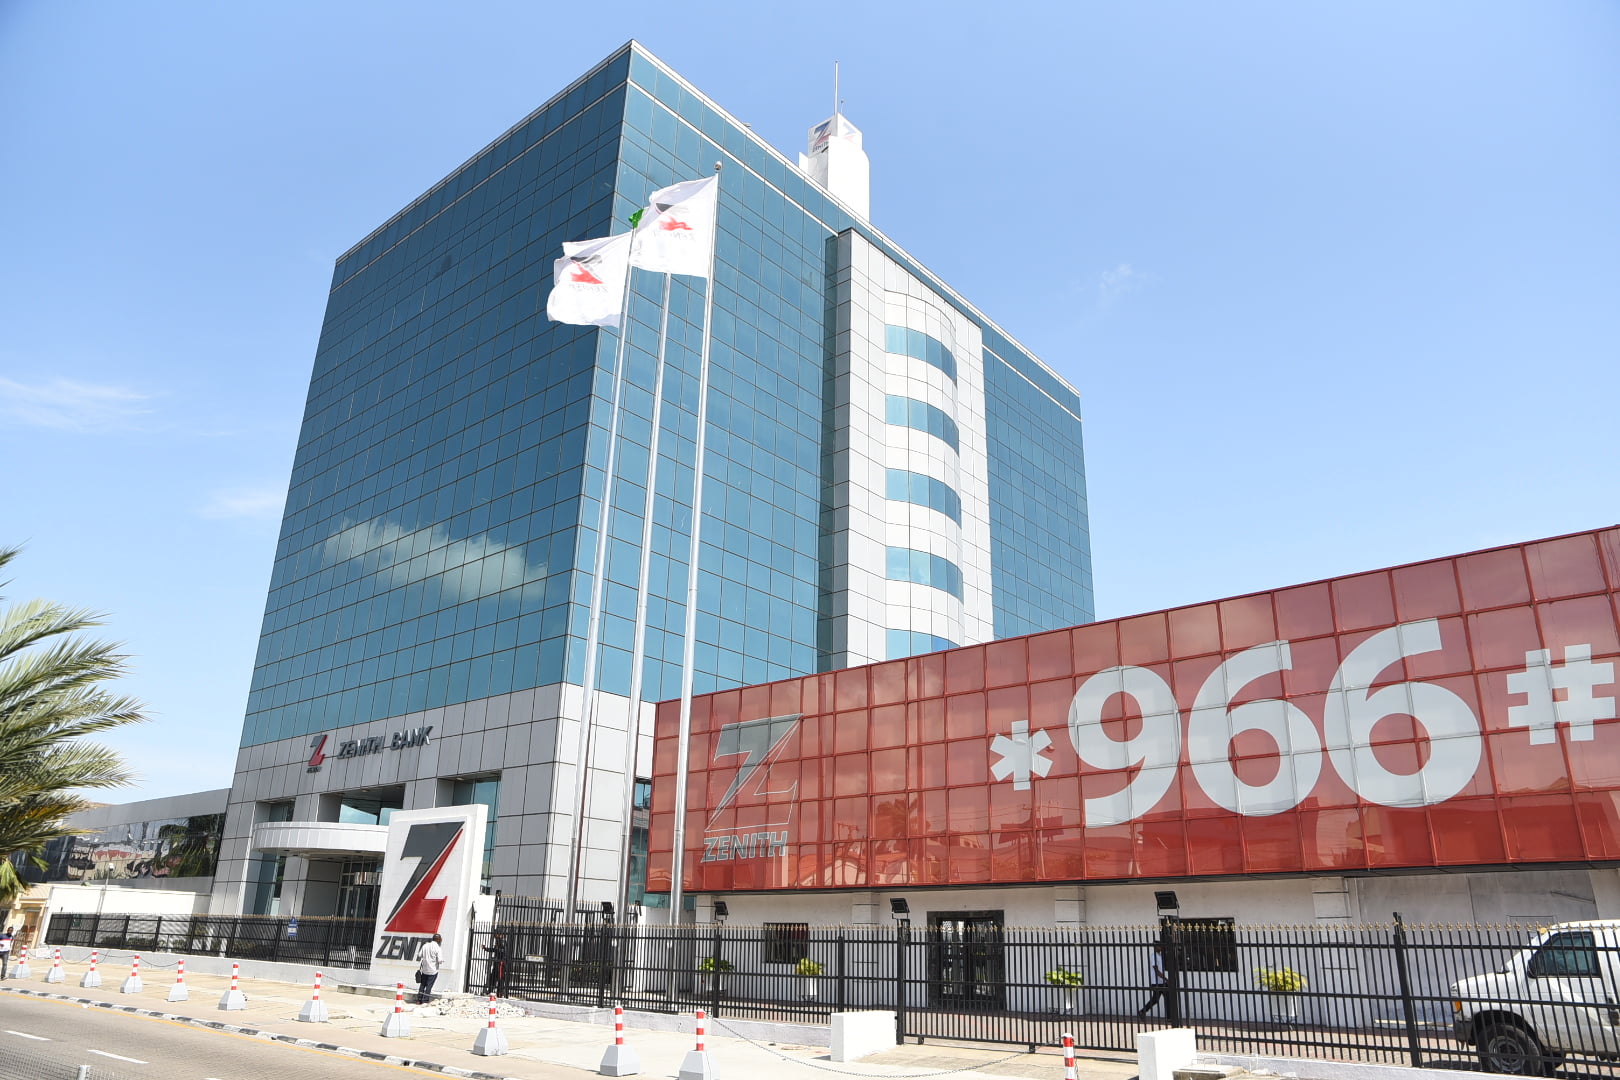 Zenith Bank Retains Position As Nigeria’s Best Commercial Bank